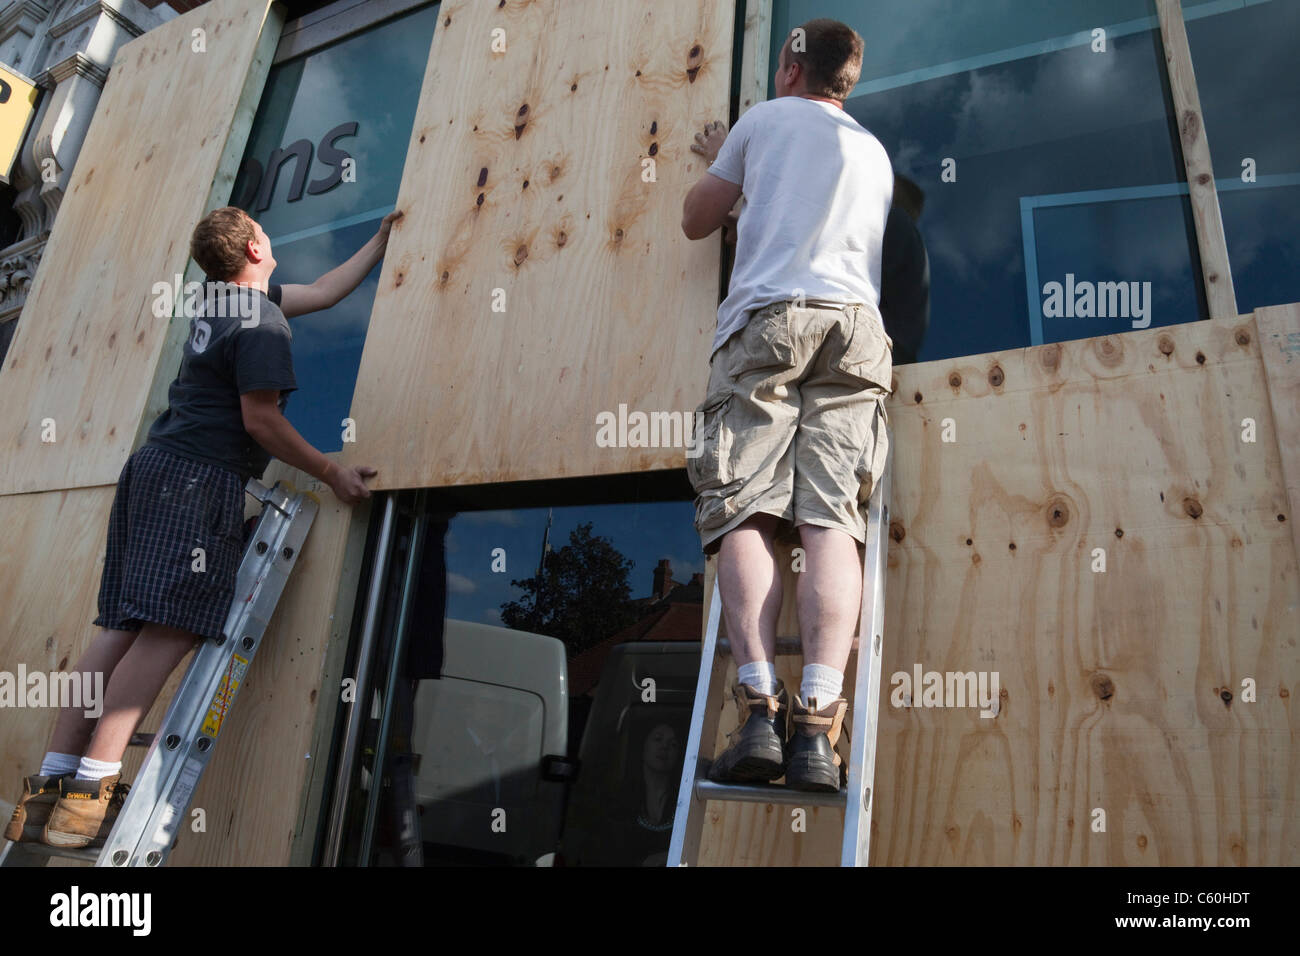 Shopkeepers boarding up their shops in Muswell Hill, North London Stock Photo